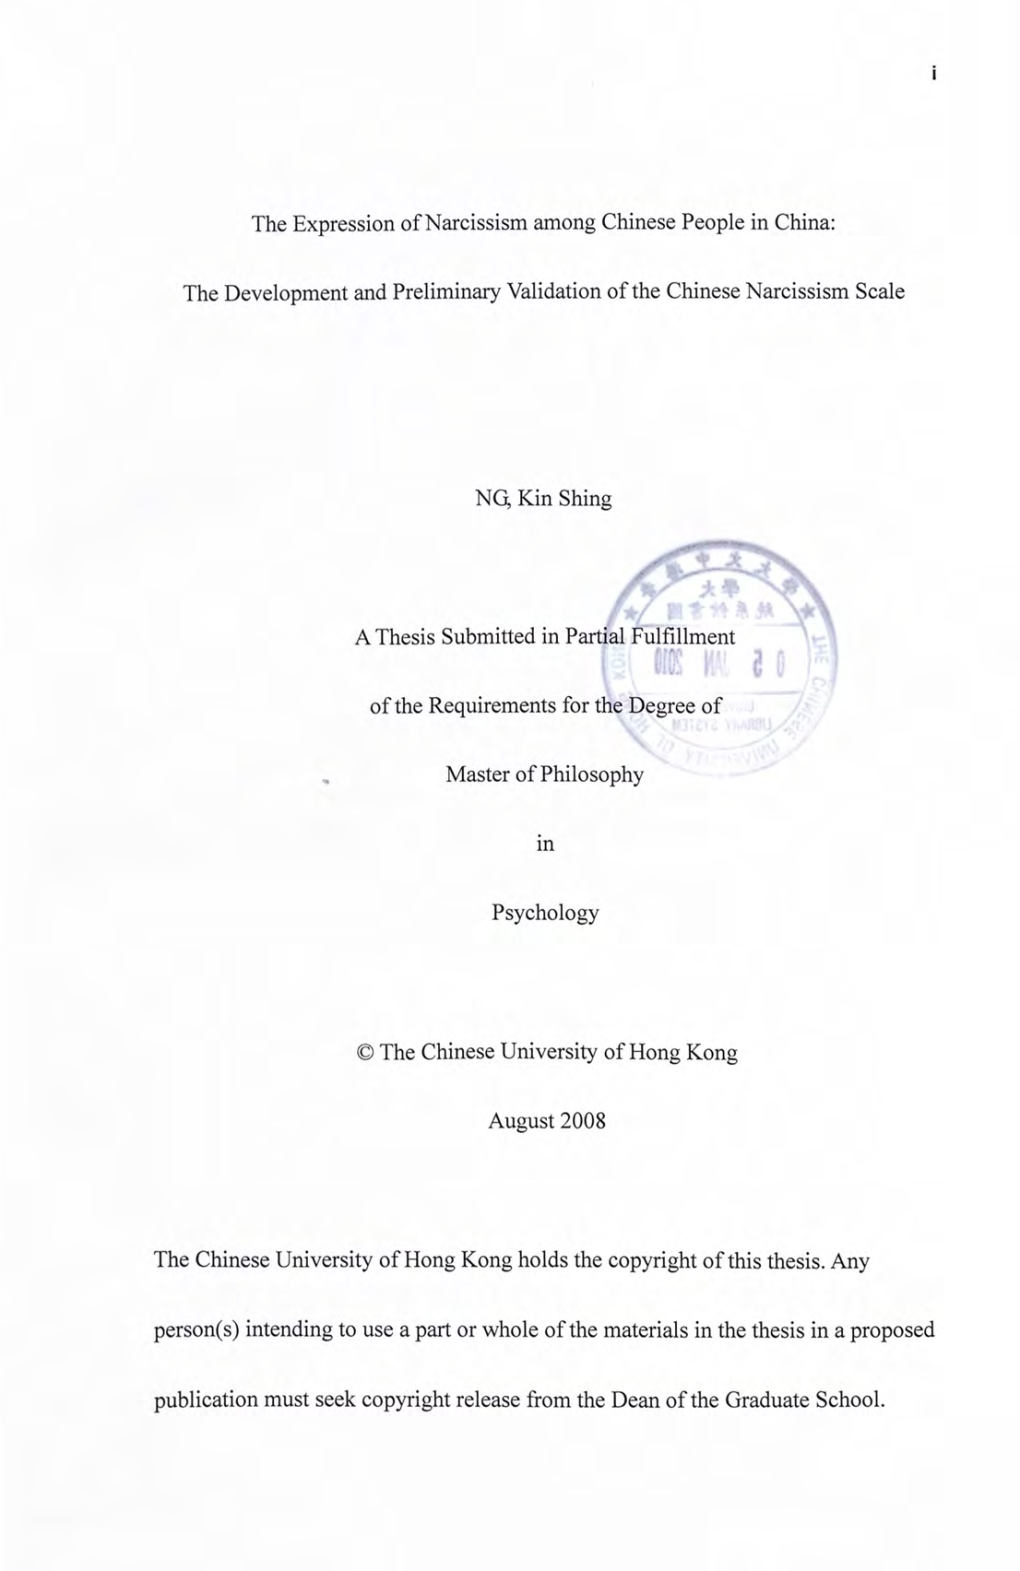 The Development and Preliminary Validation of the Chinese Narcissism Scale